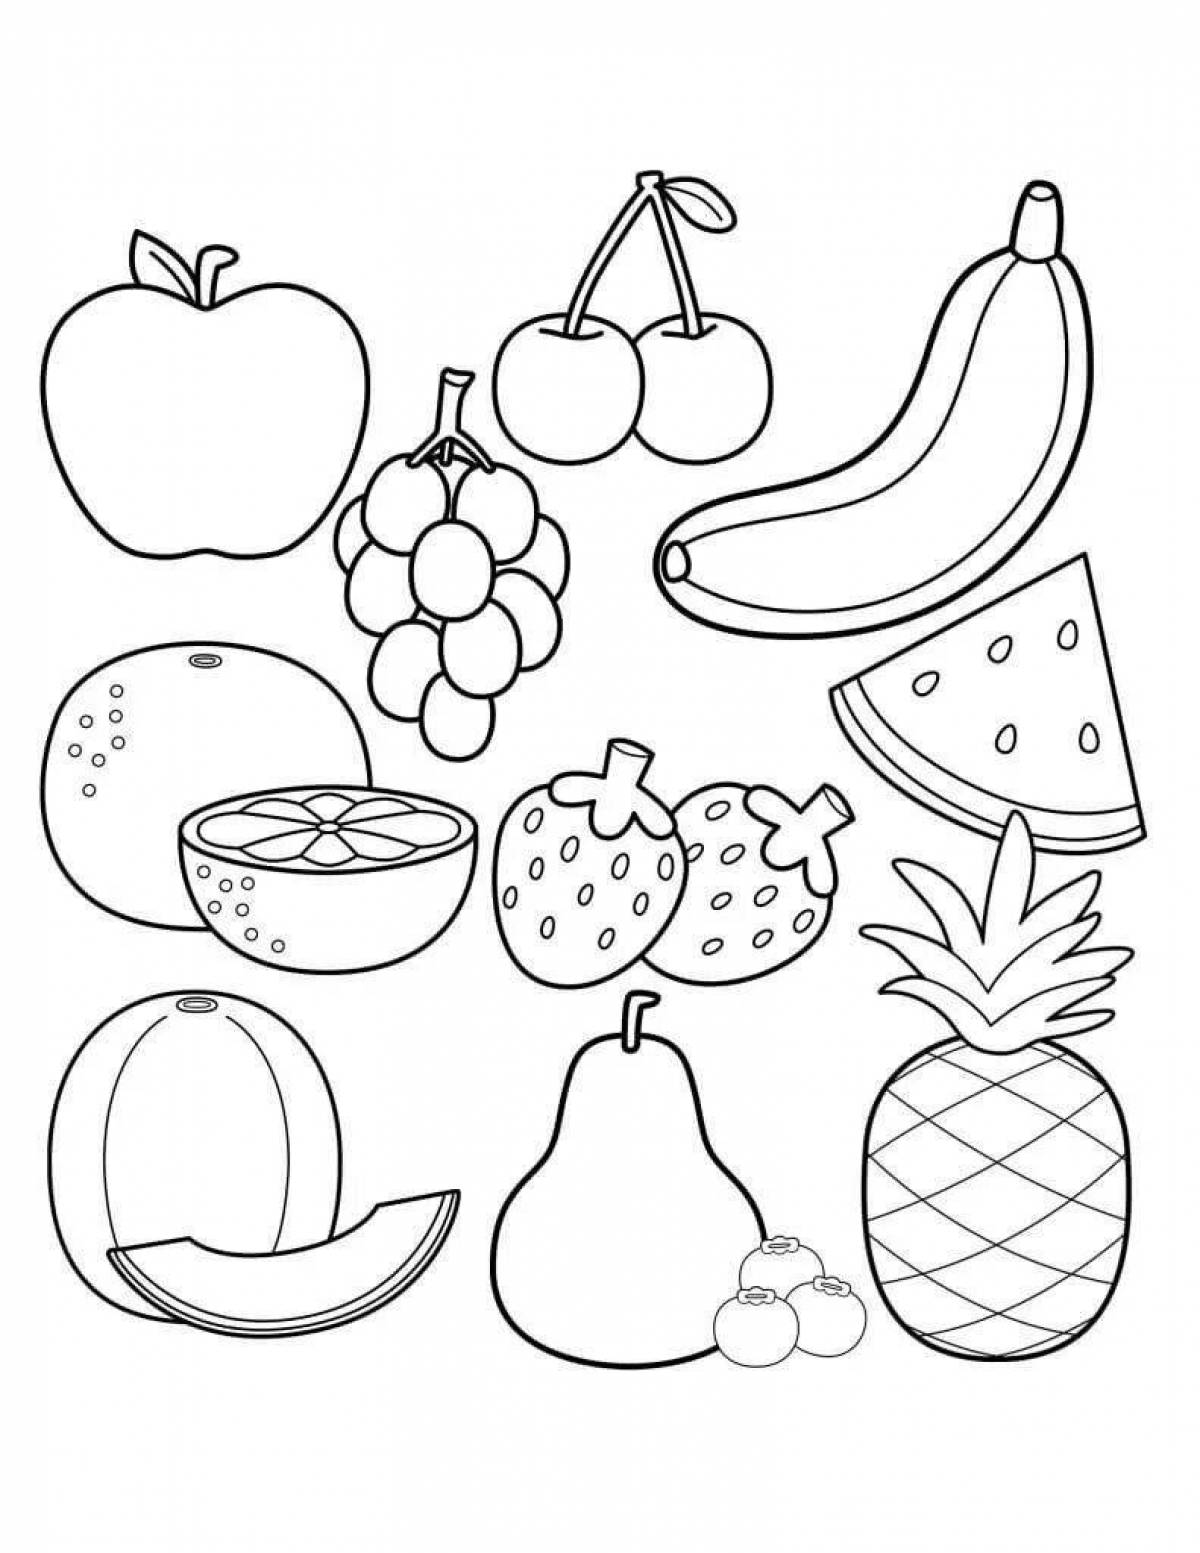 Coloring bright fruits for children 5-6 years old